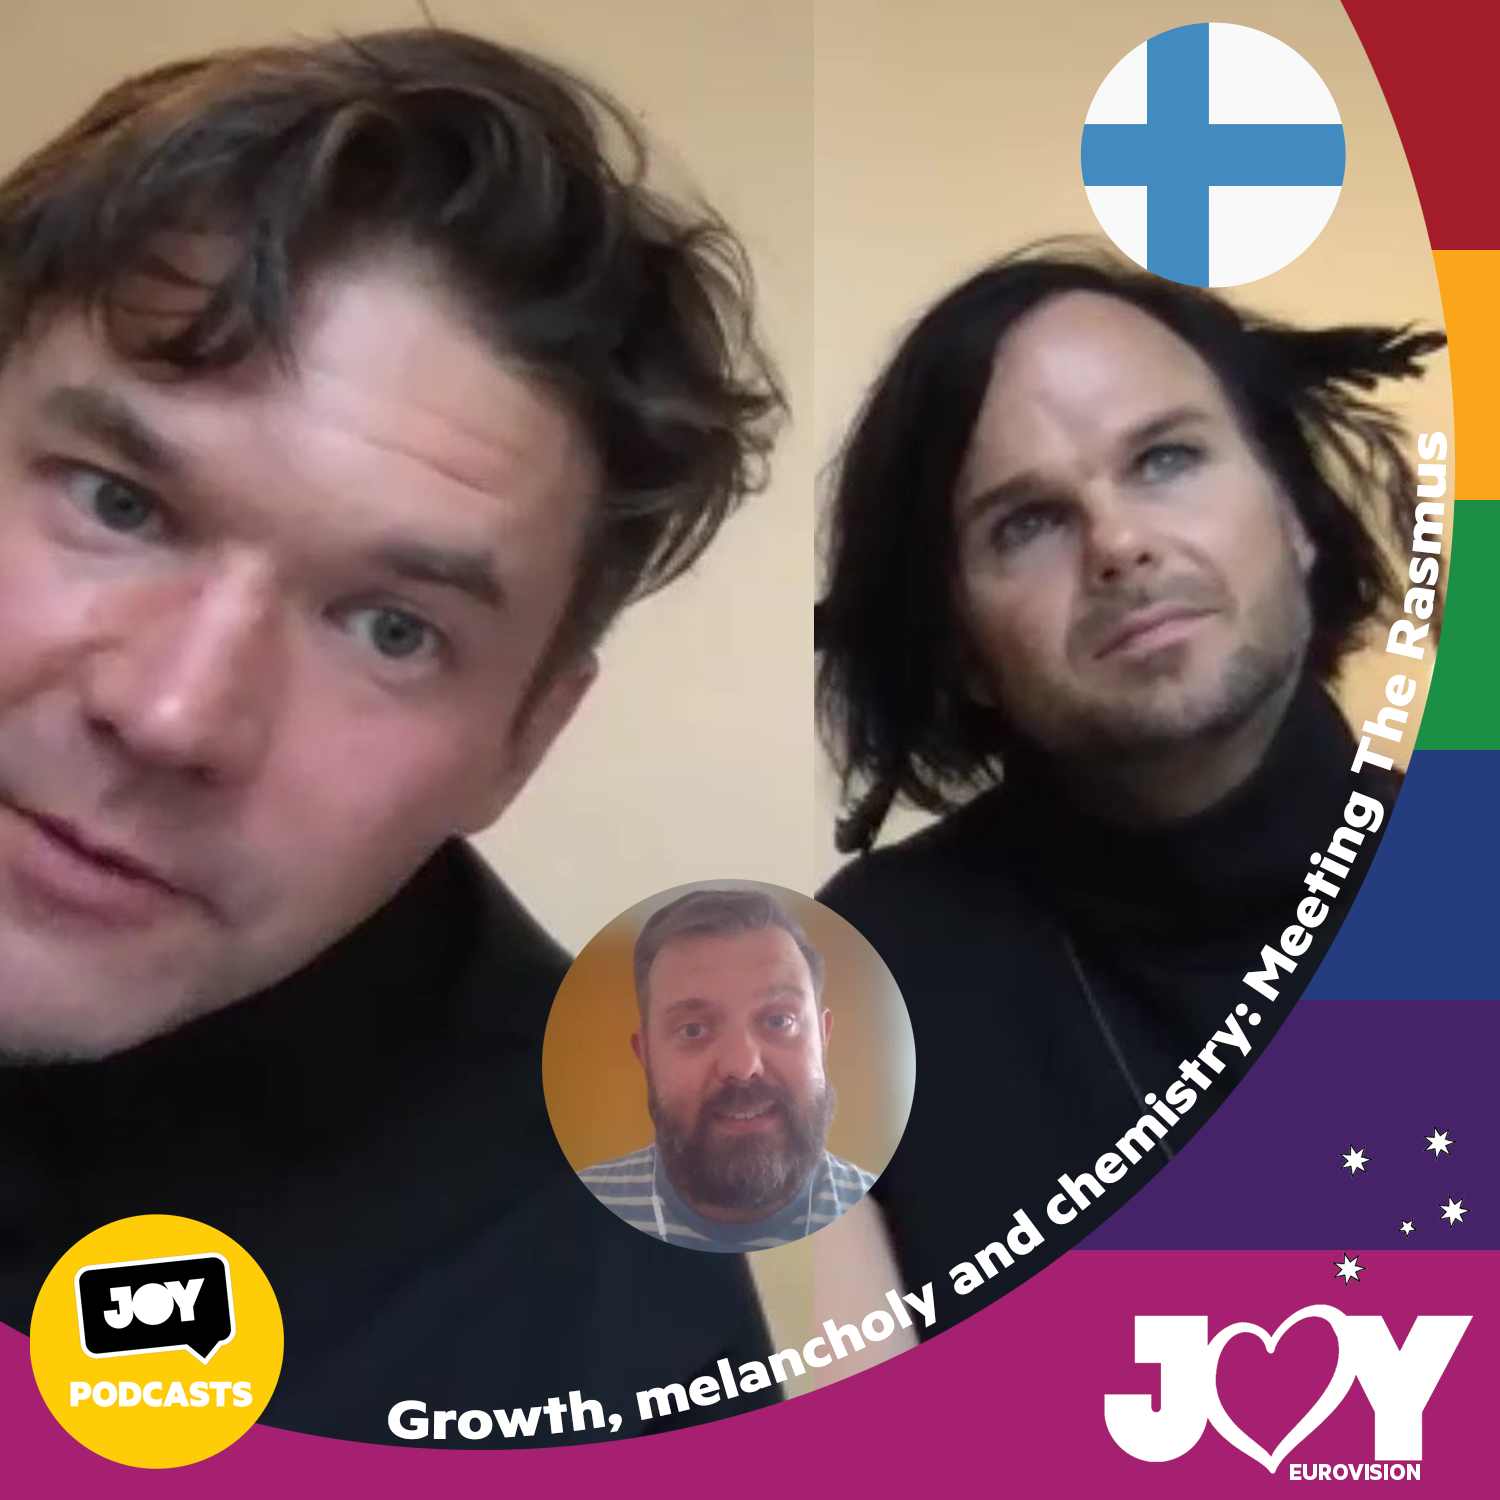 🇫🇮 Growth, melancholy and chemistry: Meeting The Rasmus